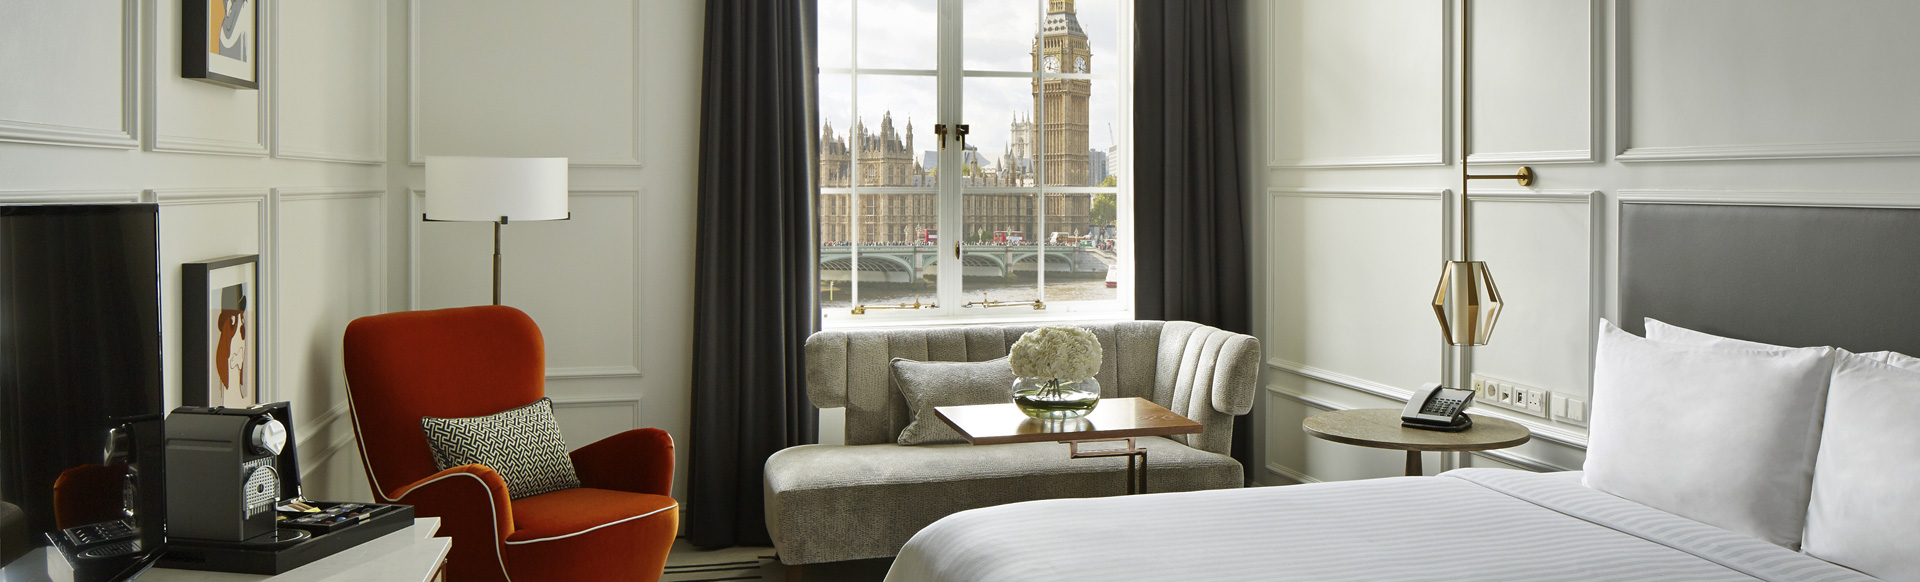 Bright hotel room with an elegant white interior, with a view of the Big Ben and Houses of Parliament.